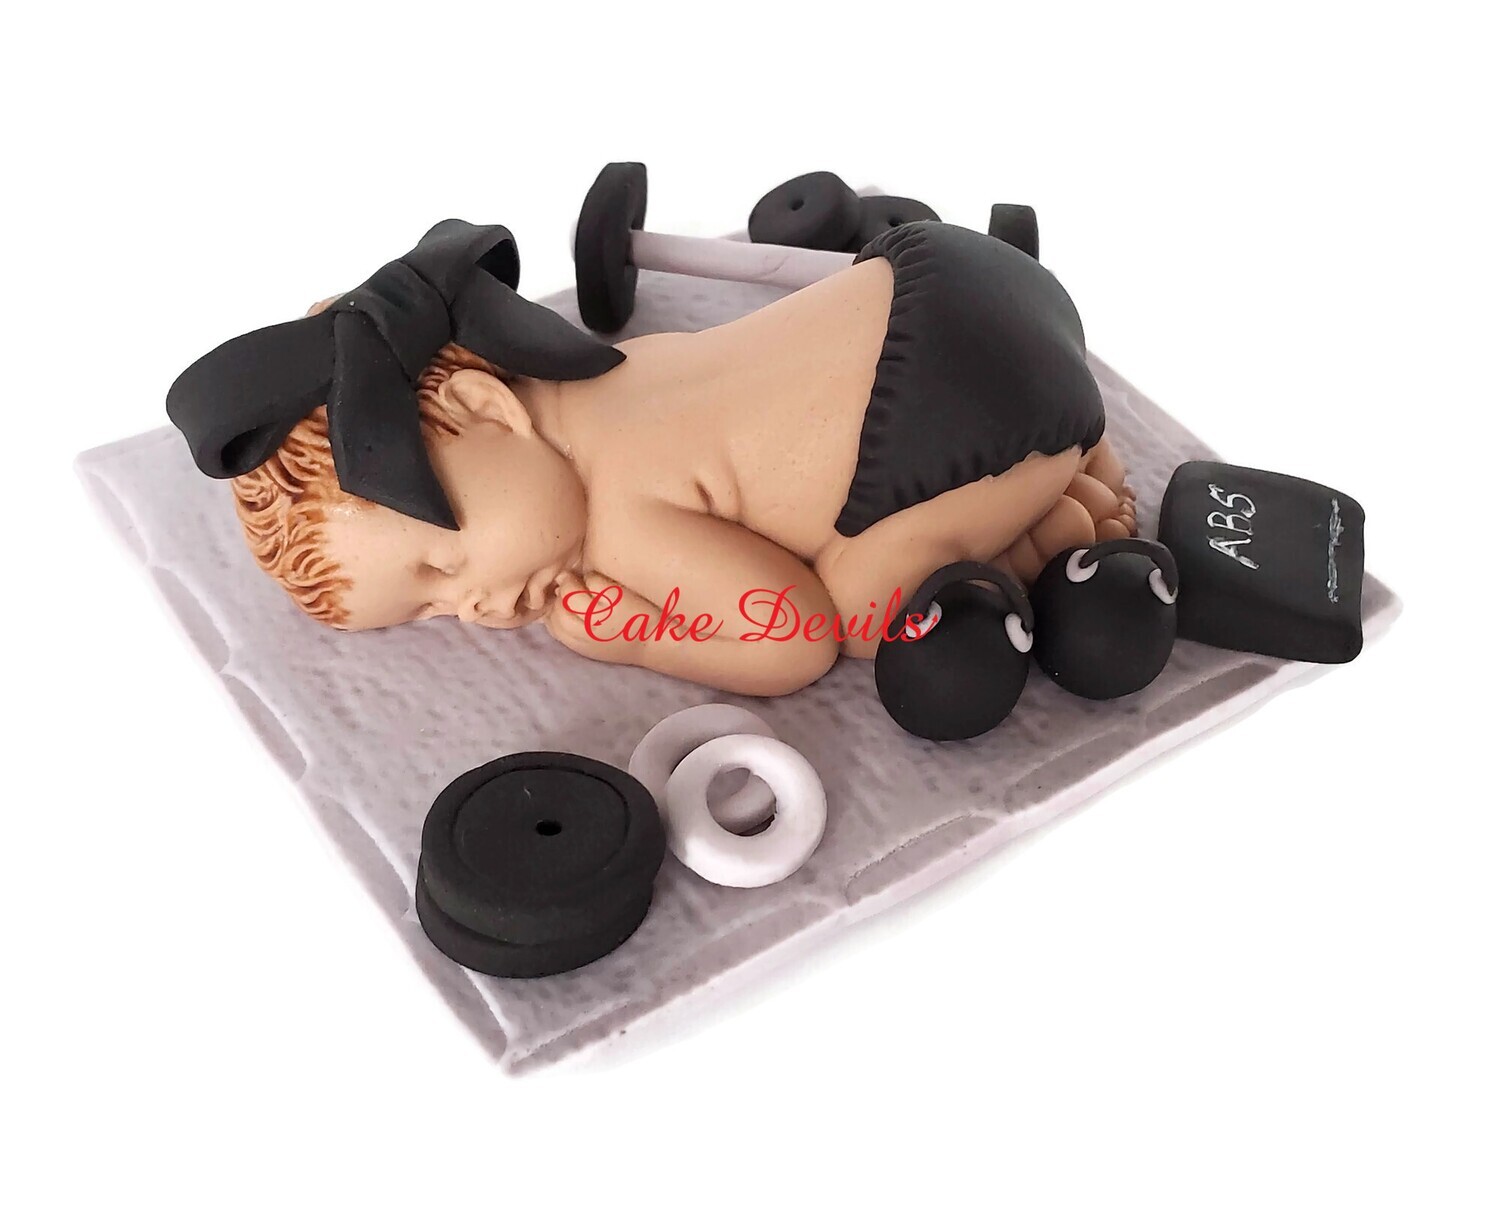 Fondant Exercise Baby Shower Cake Topper for the cross fit baby